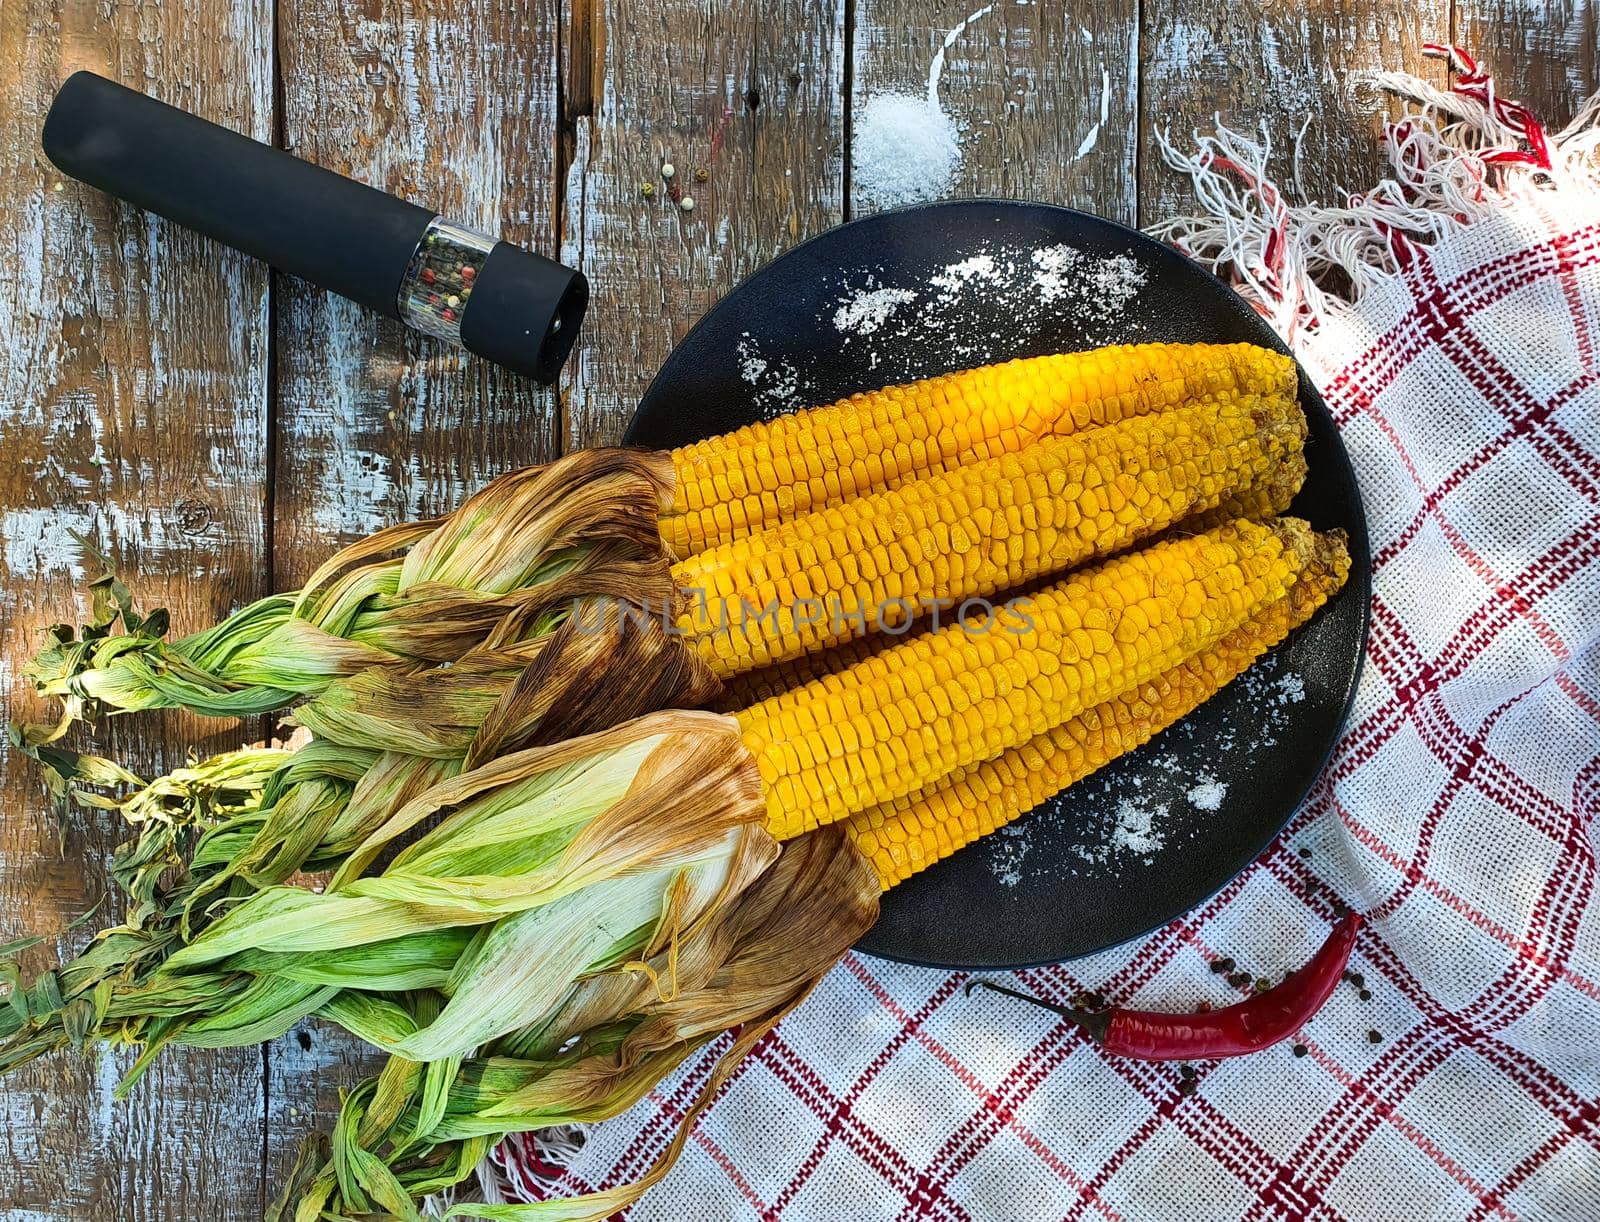 There is grilled corn on a black plate by Spirina